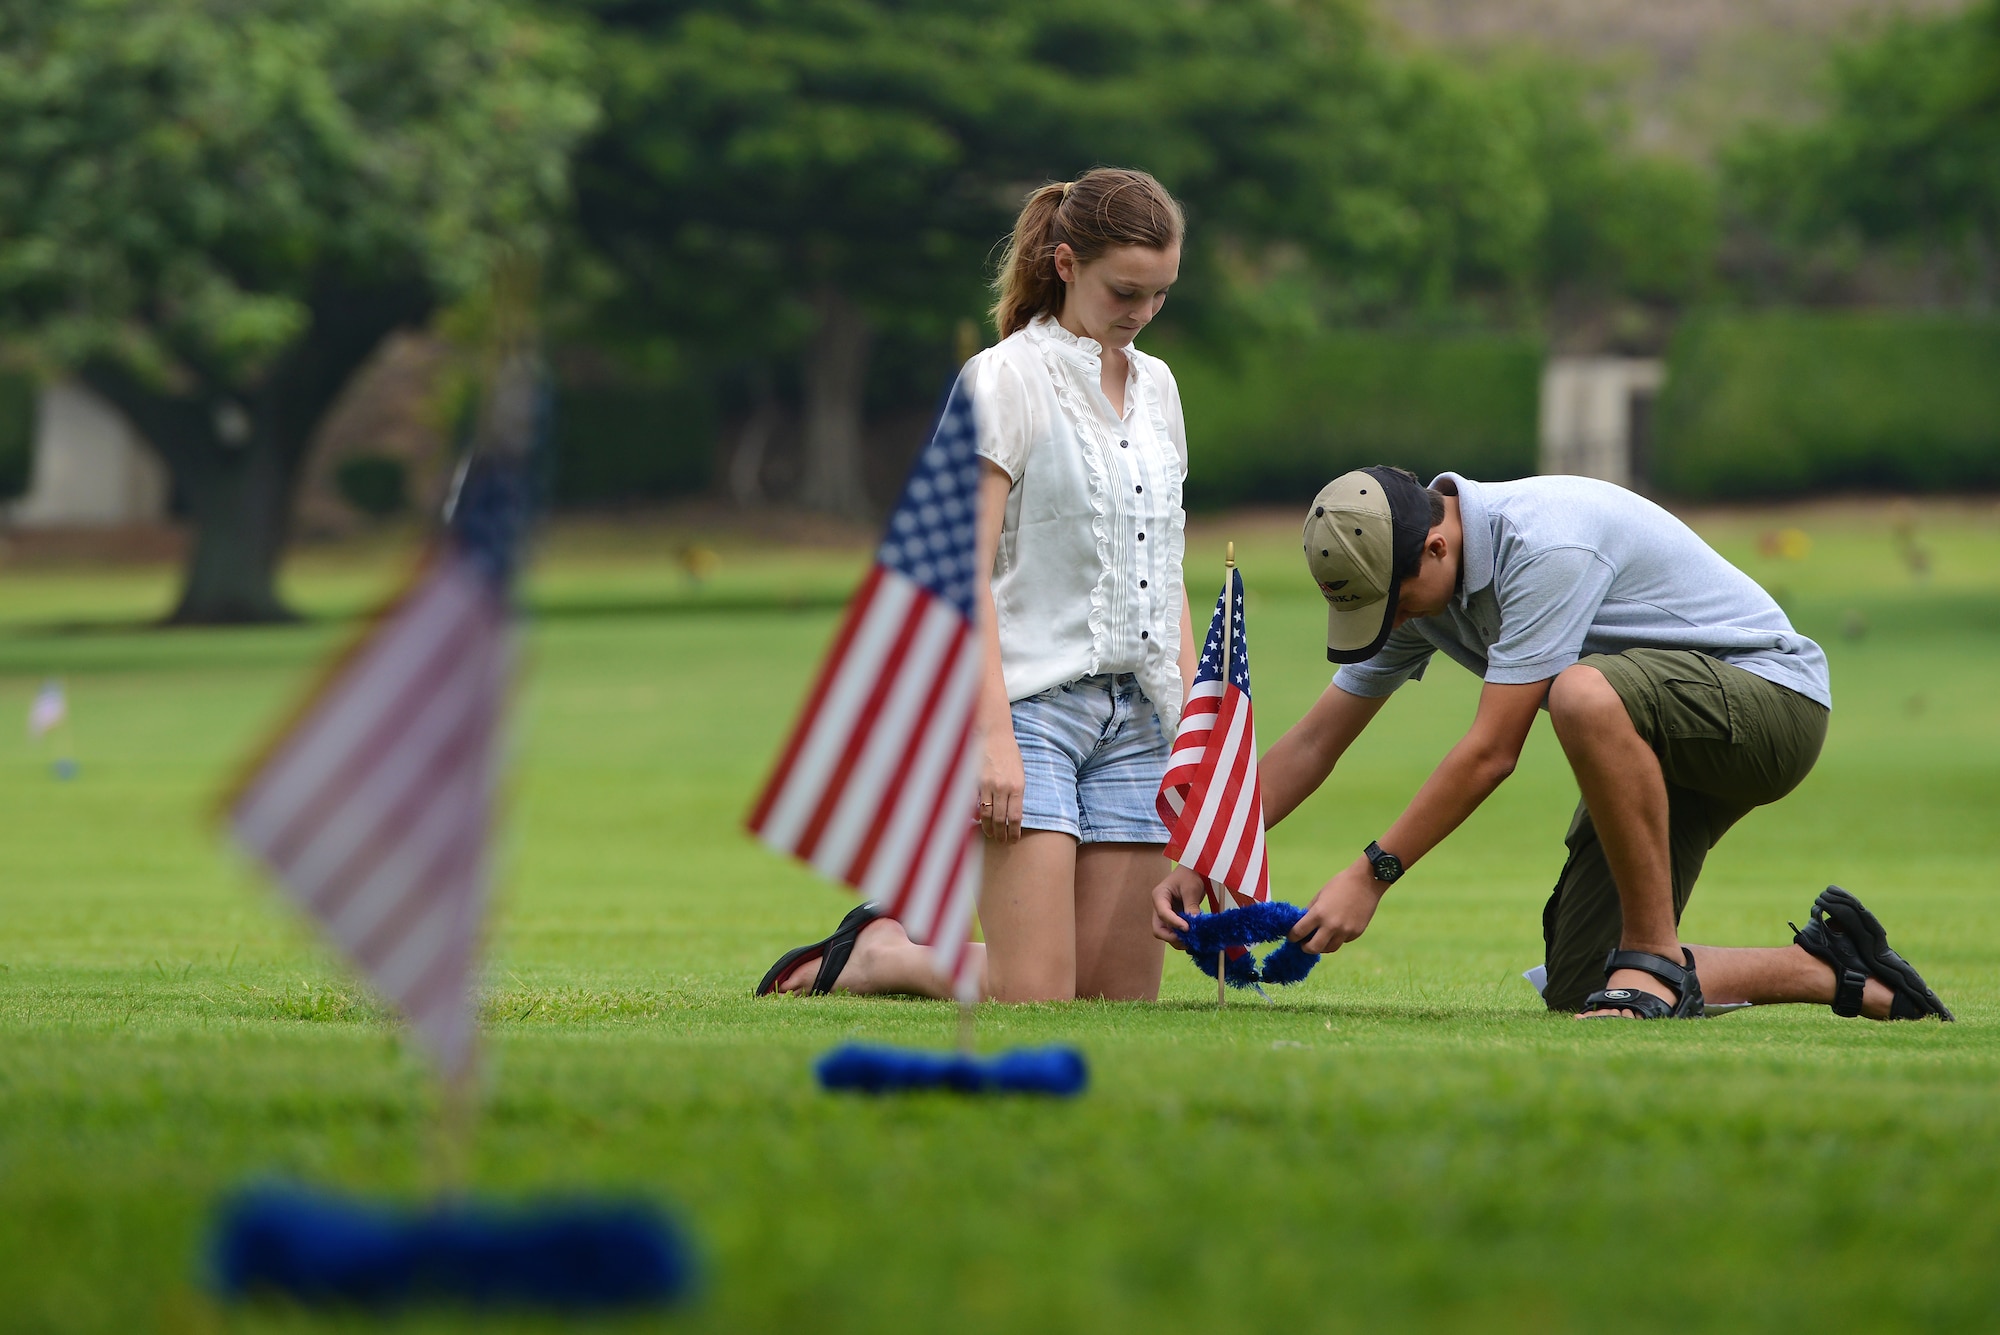 Emma McLeod and Chris Friedrichs places an American flag and handmade lei at the top of a headstone, Dec. 2, 2012, at the National Cemetery of the Pacific, at Punchbowl in Honolulu. McLeod, Friedrichs and eight other volunteers placed 92 flags among the 34,000 gravesites on the grounds of the cemetery to honor the men who lost their lives at Hickam Field on Dec. 7, 1941. The teenagers, with the help of Jessie Higa, started the project to place American flags and leis at the gravesites of the fallen Hickam Field Airmen for a community service project in 2011. They had a lei making party and watched the World War II series, Band of Brothers, while making the leis. (U.S. Air Force photo/Staff Sgt. Mike Meares)